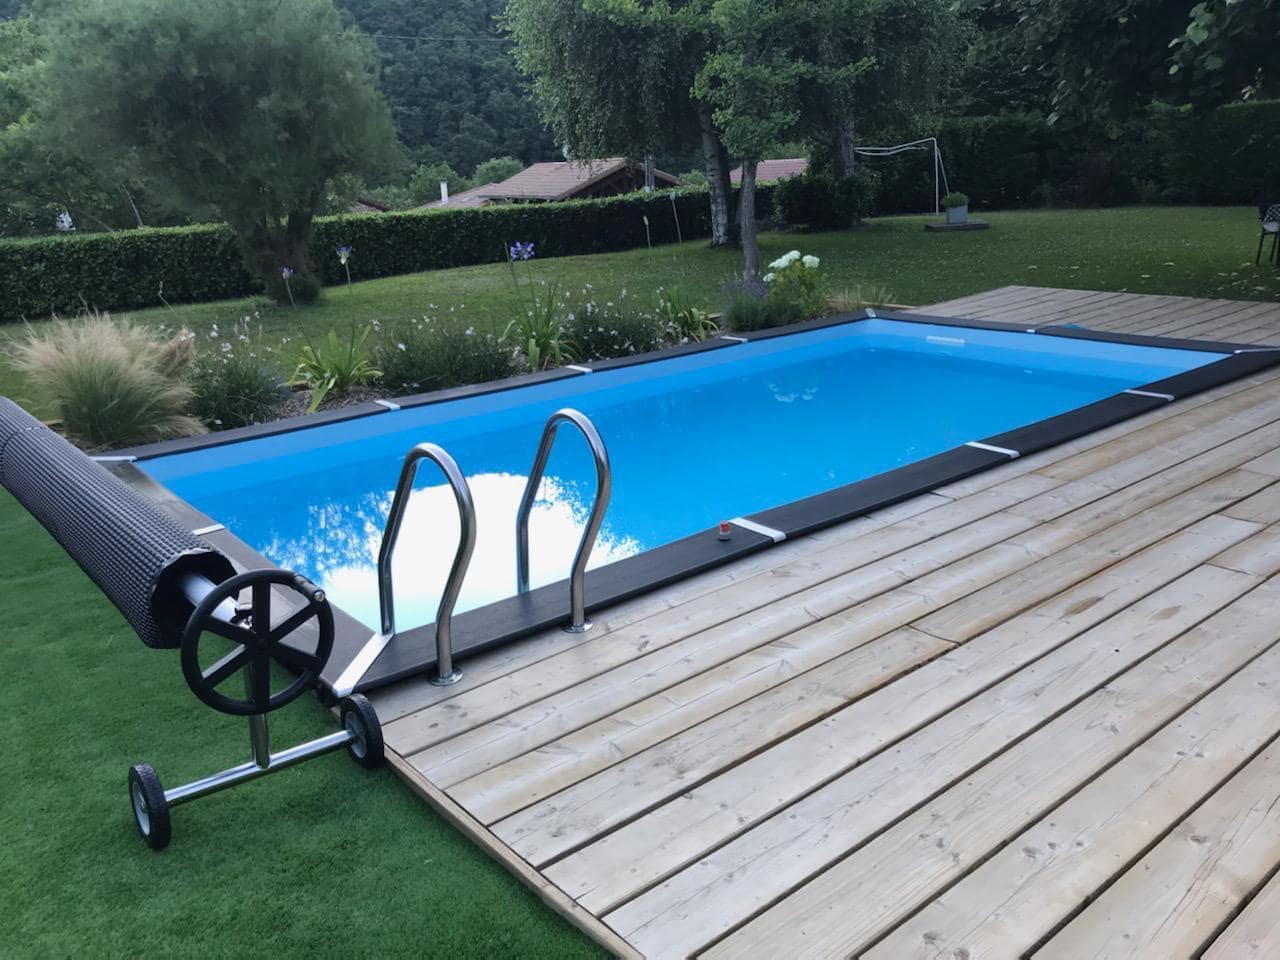 In-ground pool at the edge of a wooden deck in the middle of a garden